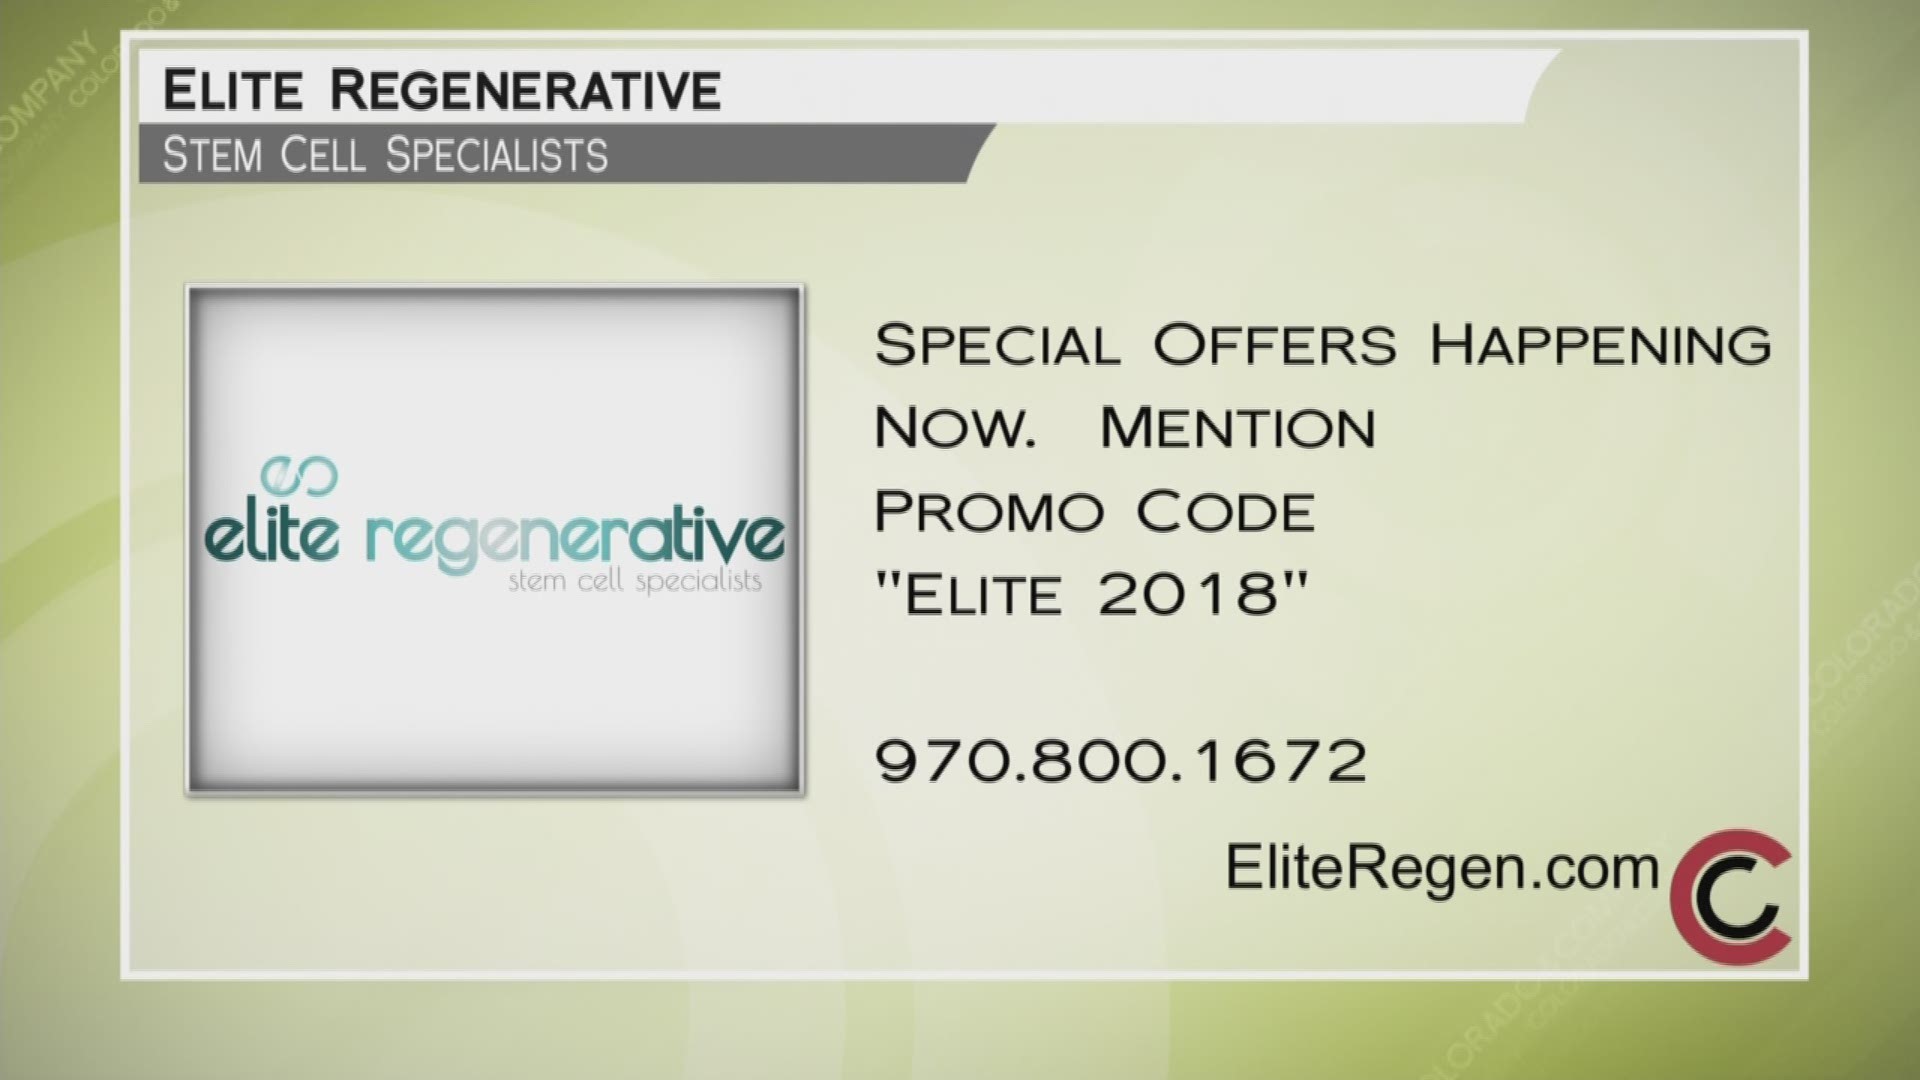 Make the call to an Elite Regenerative Stem Cell Specialist to find out all your stem cell therapy options-970.800.1672. Mention promo code "Elite 2018" when you call. Find more helpful information on their website, www.EliteRegen.com." THIS INTERVIEW HAS COMMERCIAL CONTENT. PRODUCTS AND SERVICES FEATURED APPEAR AS PAID ADVERTISING. FIND EXTENDED INTERVIEWS AND BEHIND THE SCENES FEATURES ON FACEBOOK.COM/COLORADOANDCOMPANY.